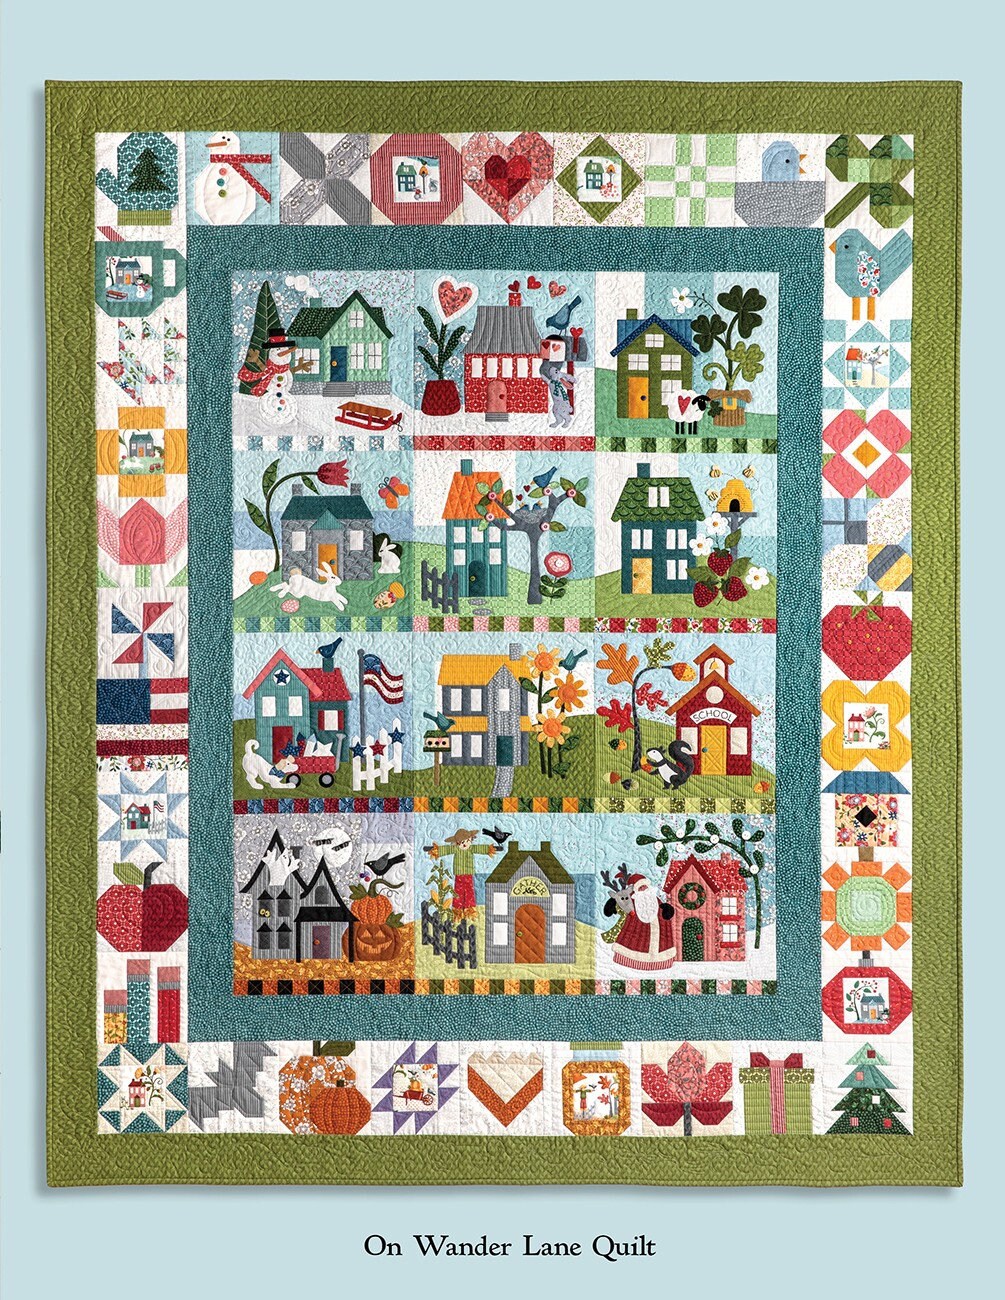 Mistletoe Crossing On Wander Lane Quilt Pattern BOM Book 12, Art to Heart ATH179P, Christmas Xmas Sewing Quilting Project, Nancy Halvorsen